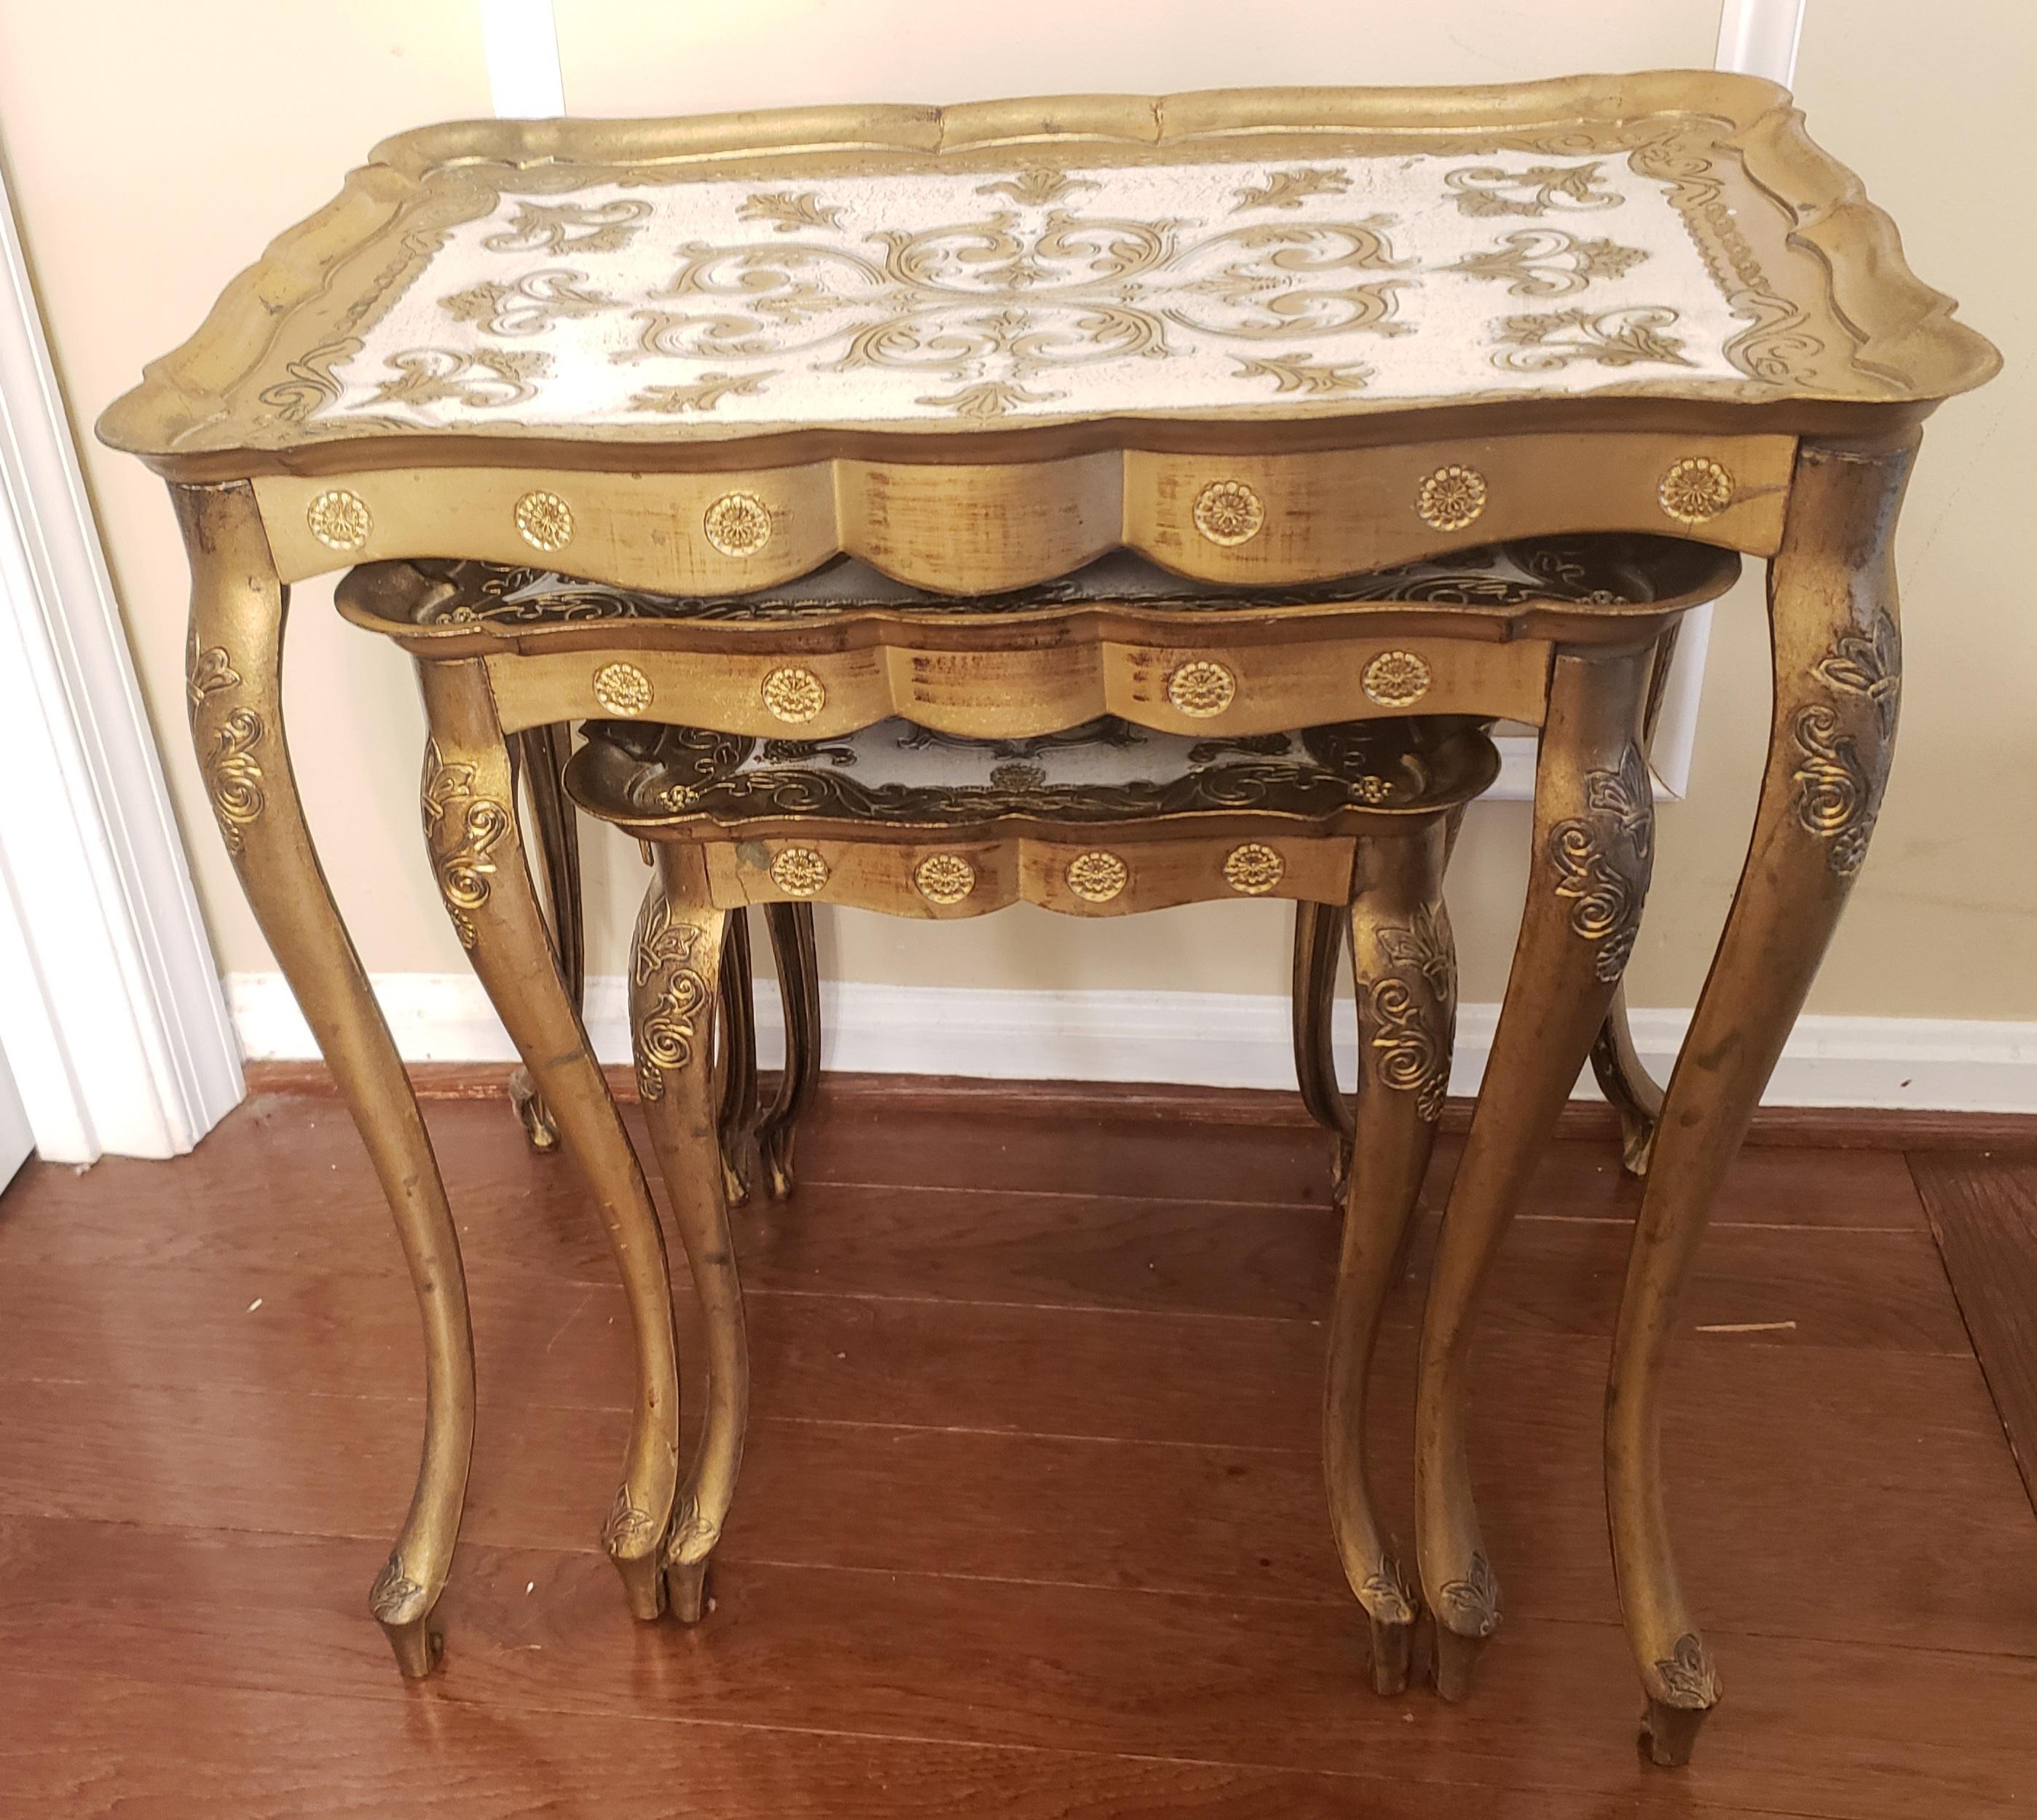 Mid-century Italian Florentine Nesting tables are ideal for cozy living spaces, where a nicely proportioned end table is desired, yet two more smaller end tables are immediately available should the occasion demand it. Finished in a lovely gold with